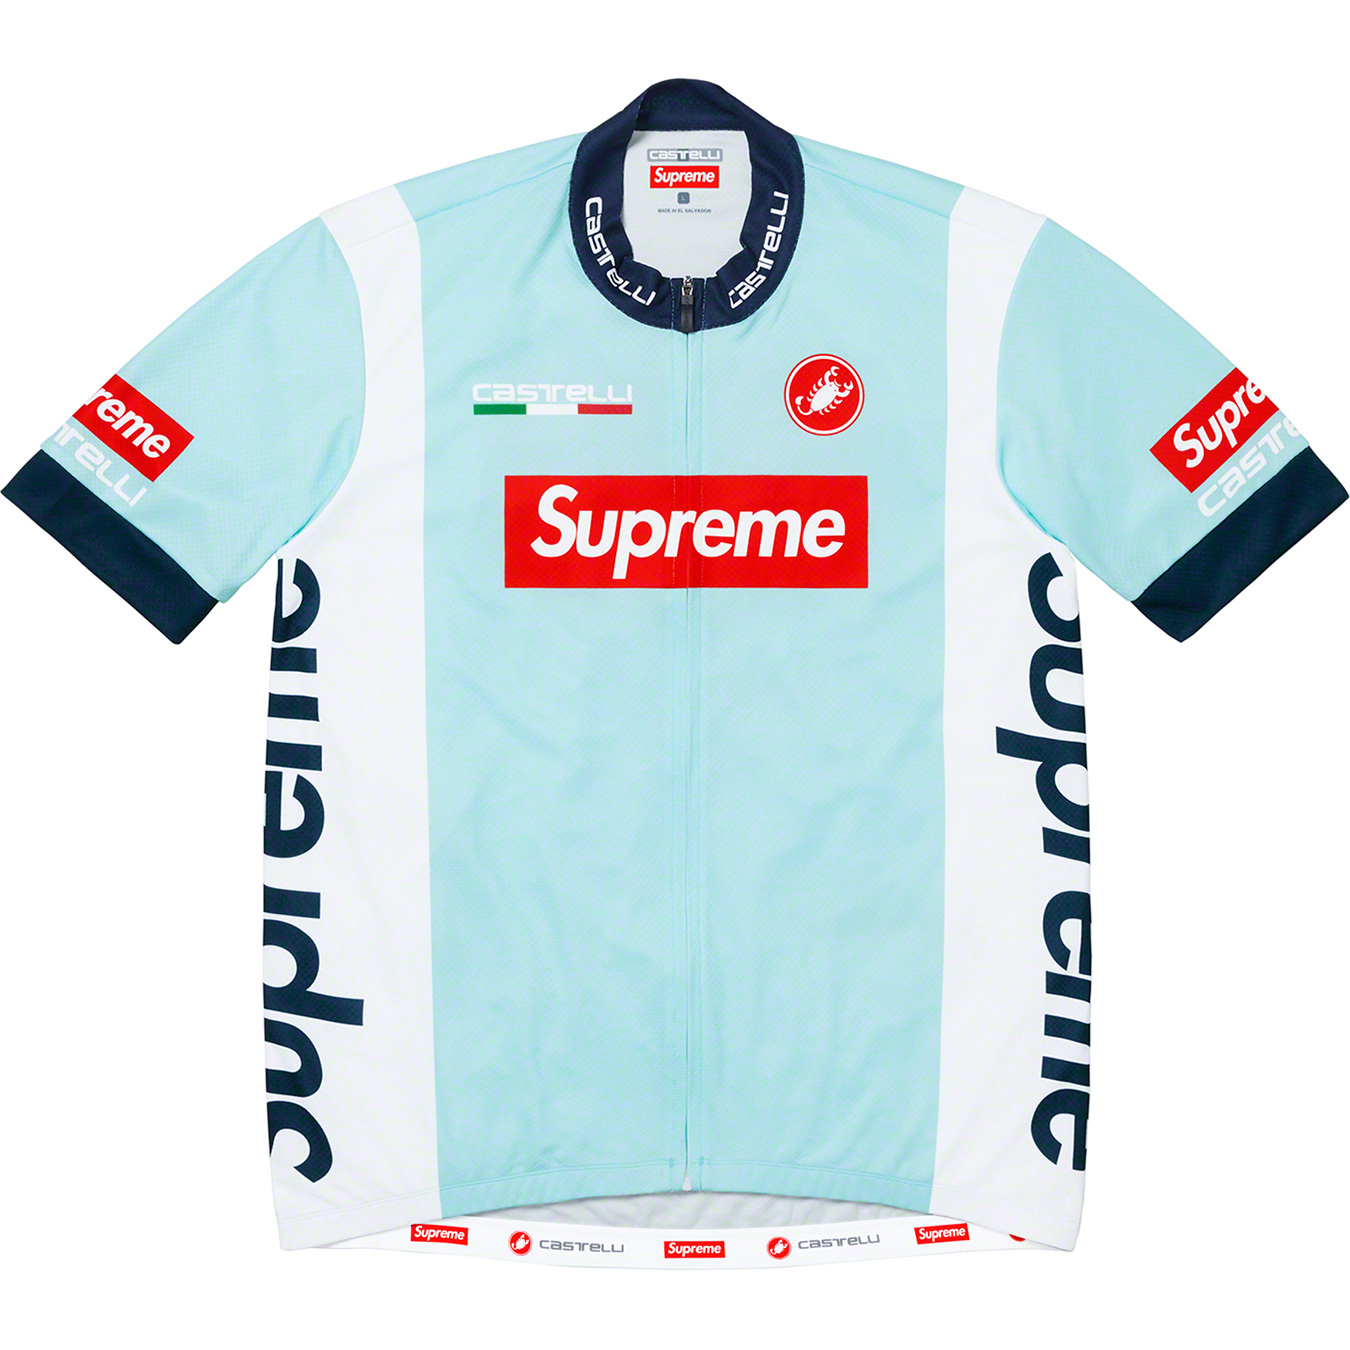 Castelli Cycling Jersey - spring summer 2019 - Supreme